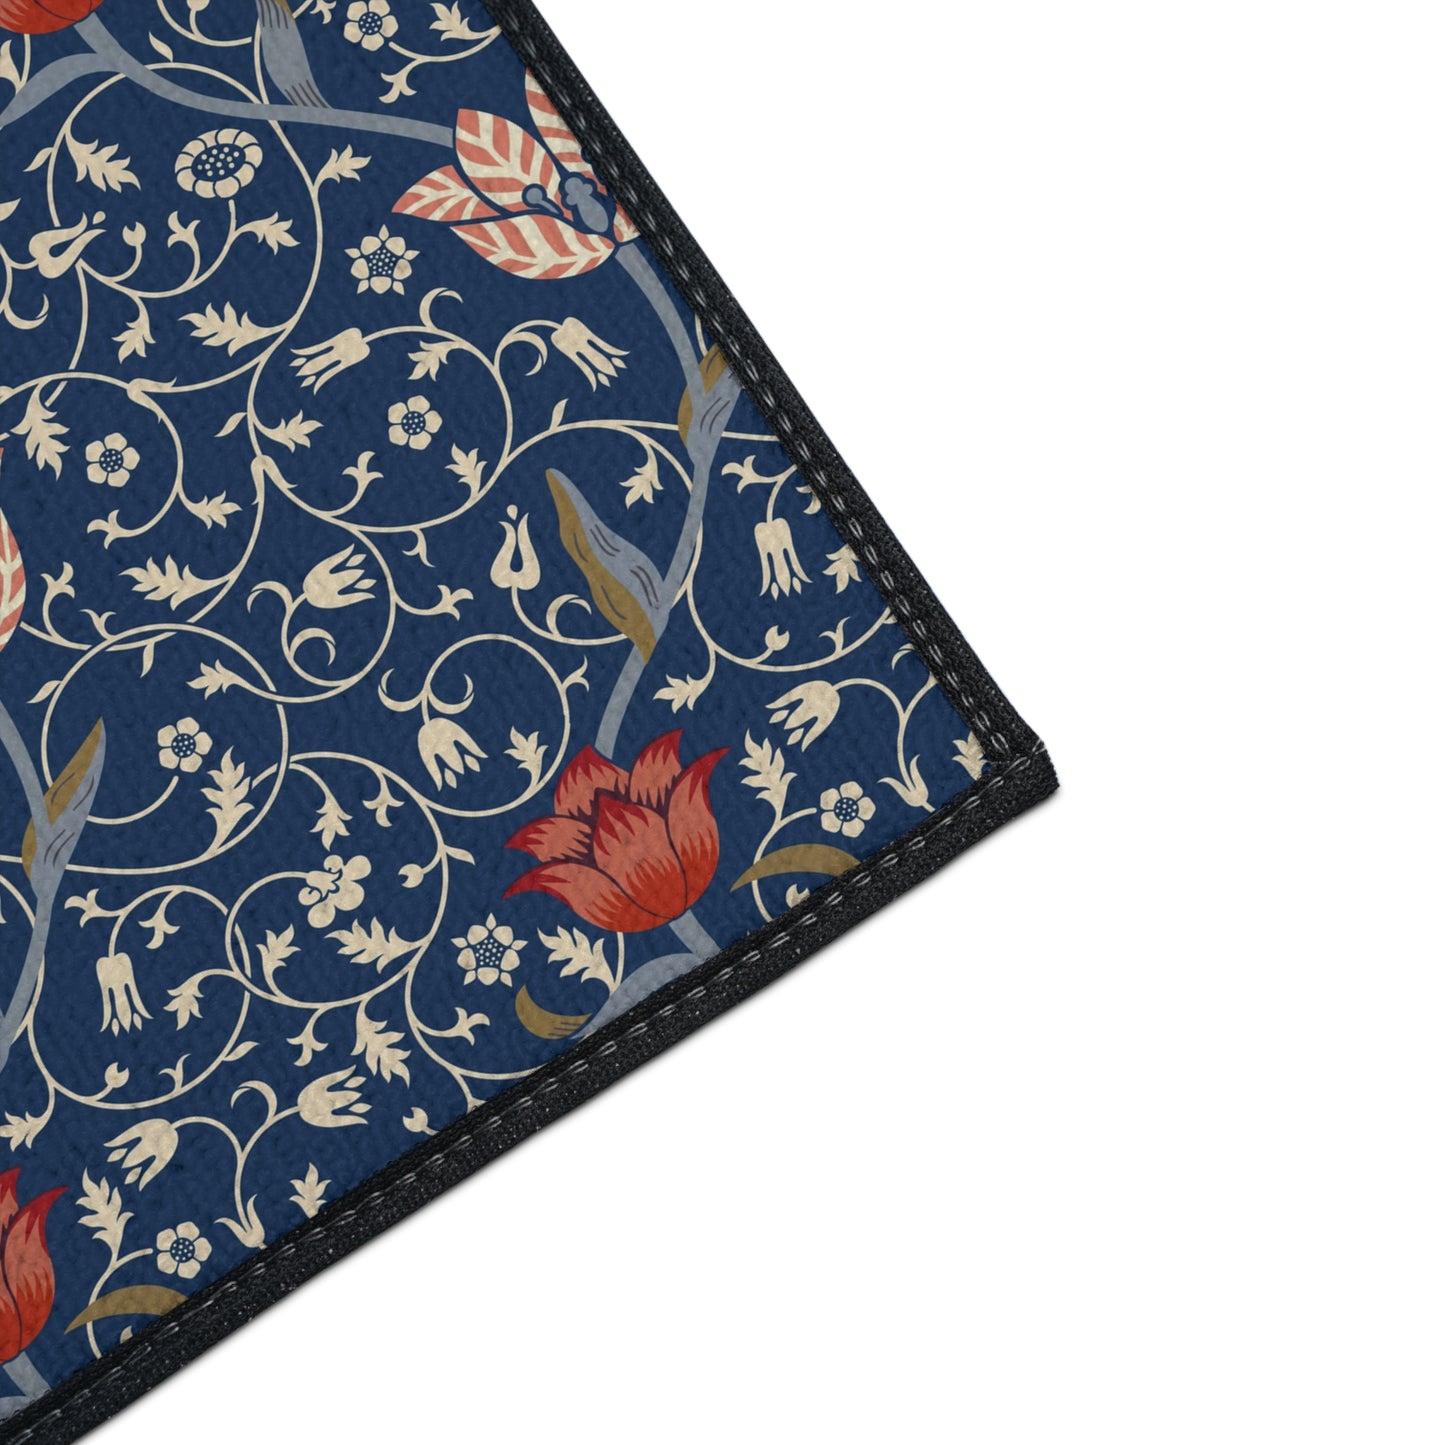 william-morris-co-heavy-duty-floor-mat-medway-collection-14